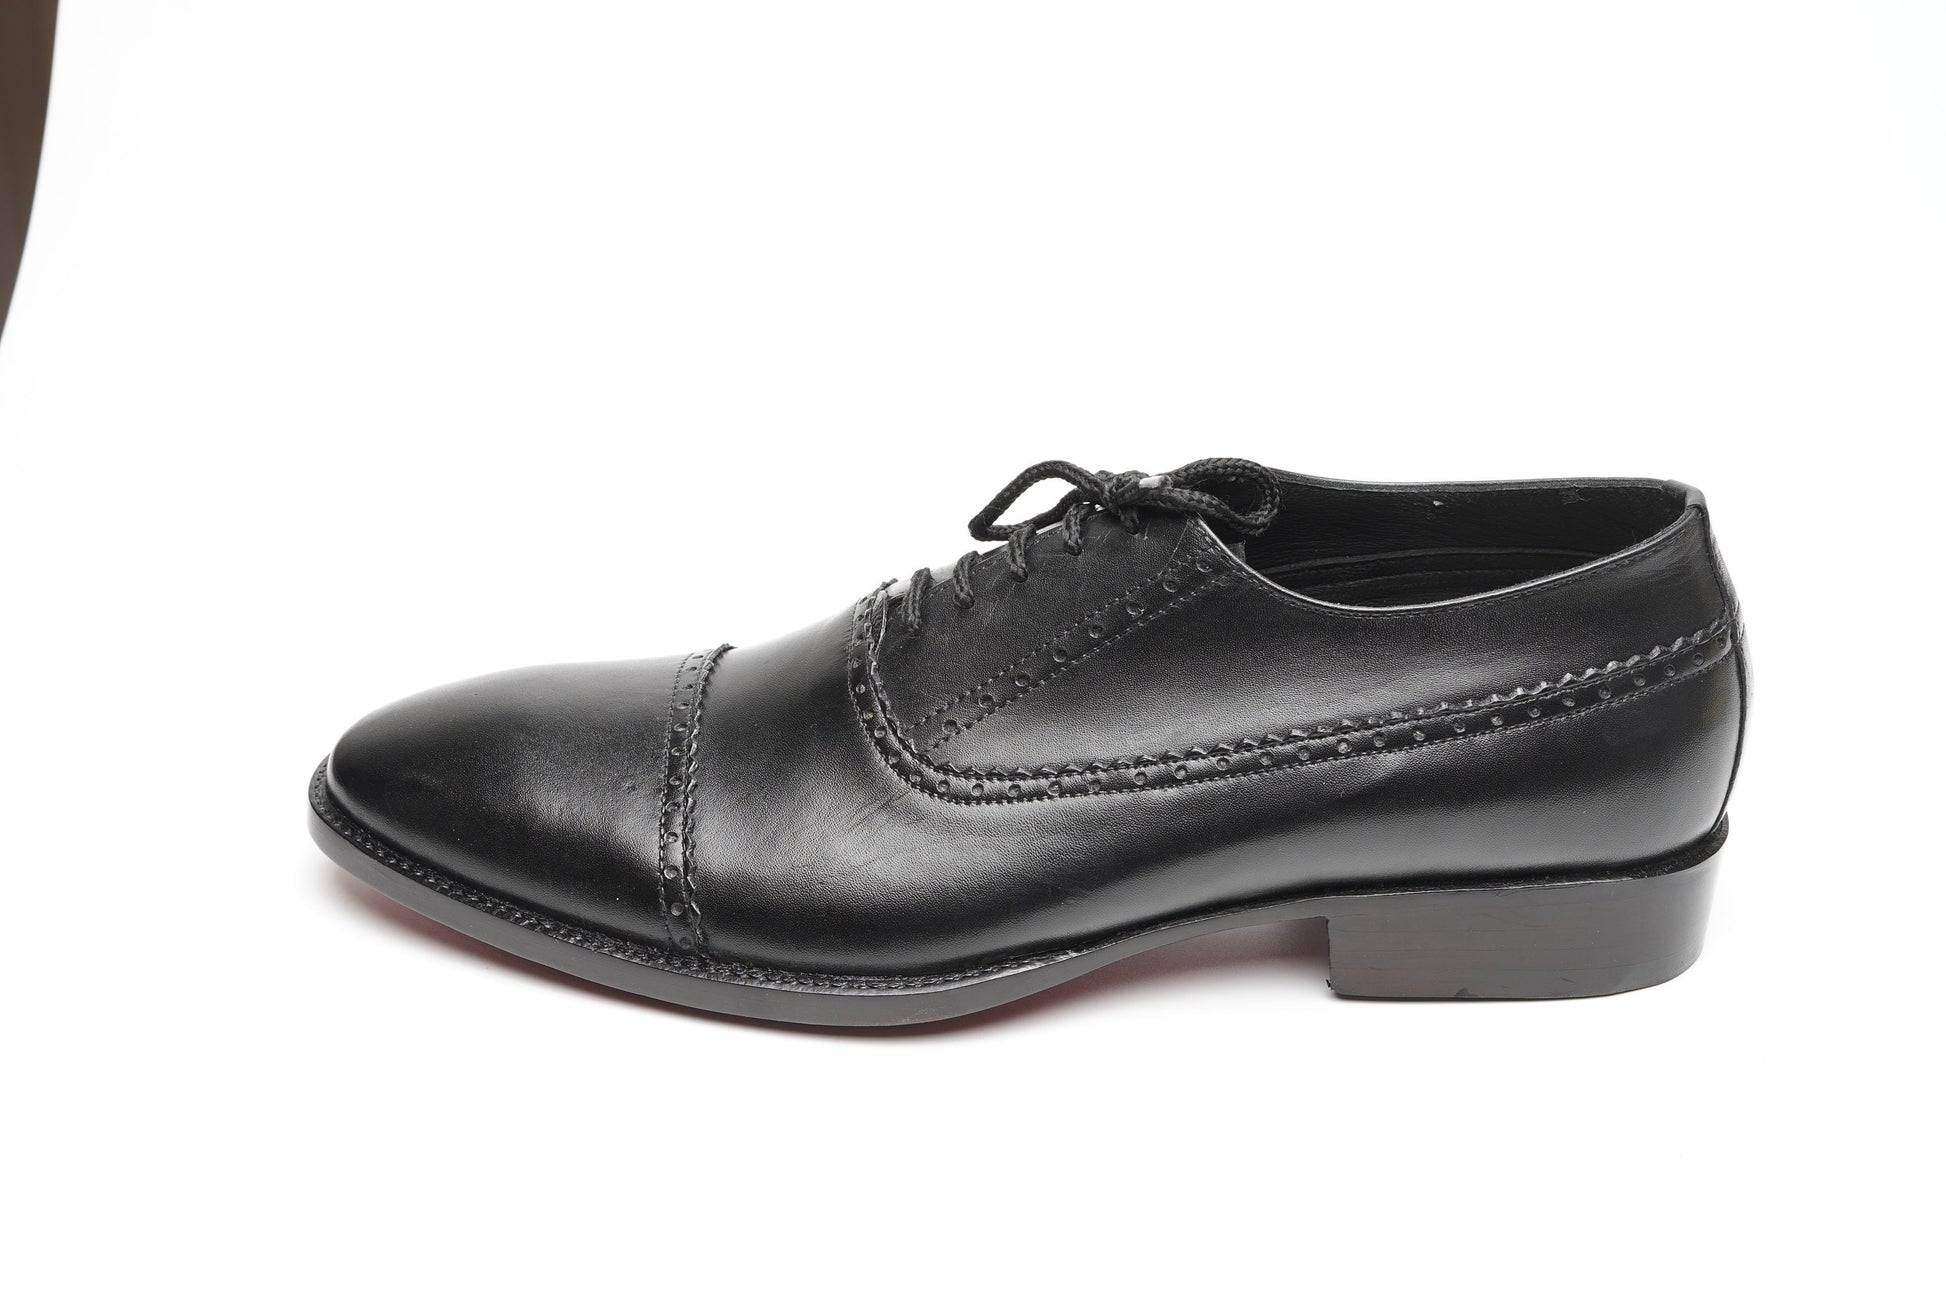 Real handmade Black Cap Toe Oxford Made of full Grain Natural Crust leather Woozy Store